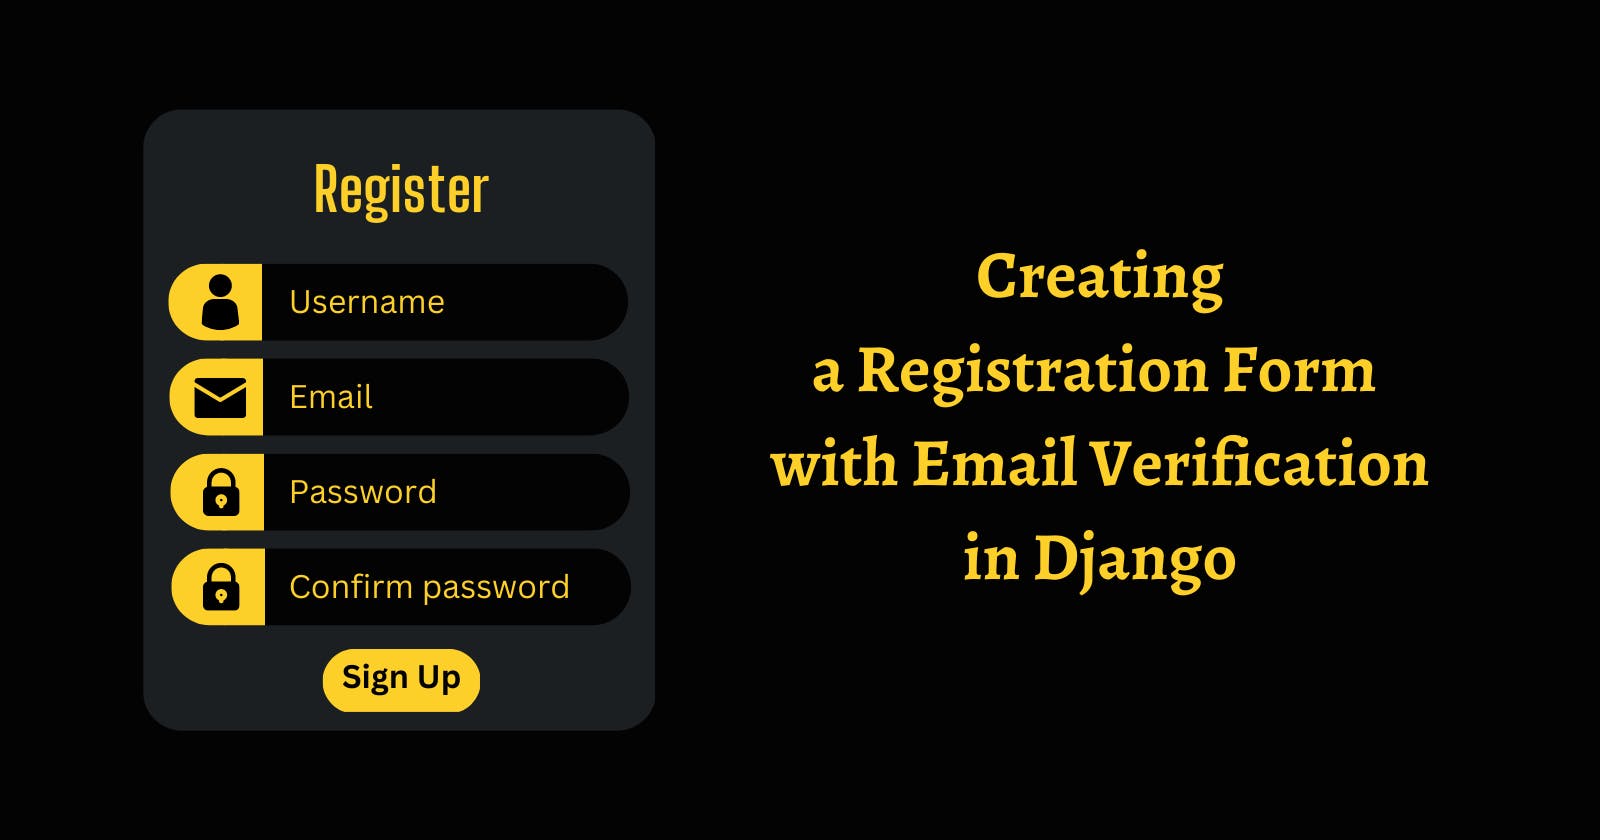 Creating a Registration Form with Email Verification in Django